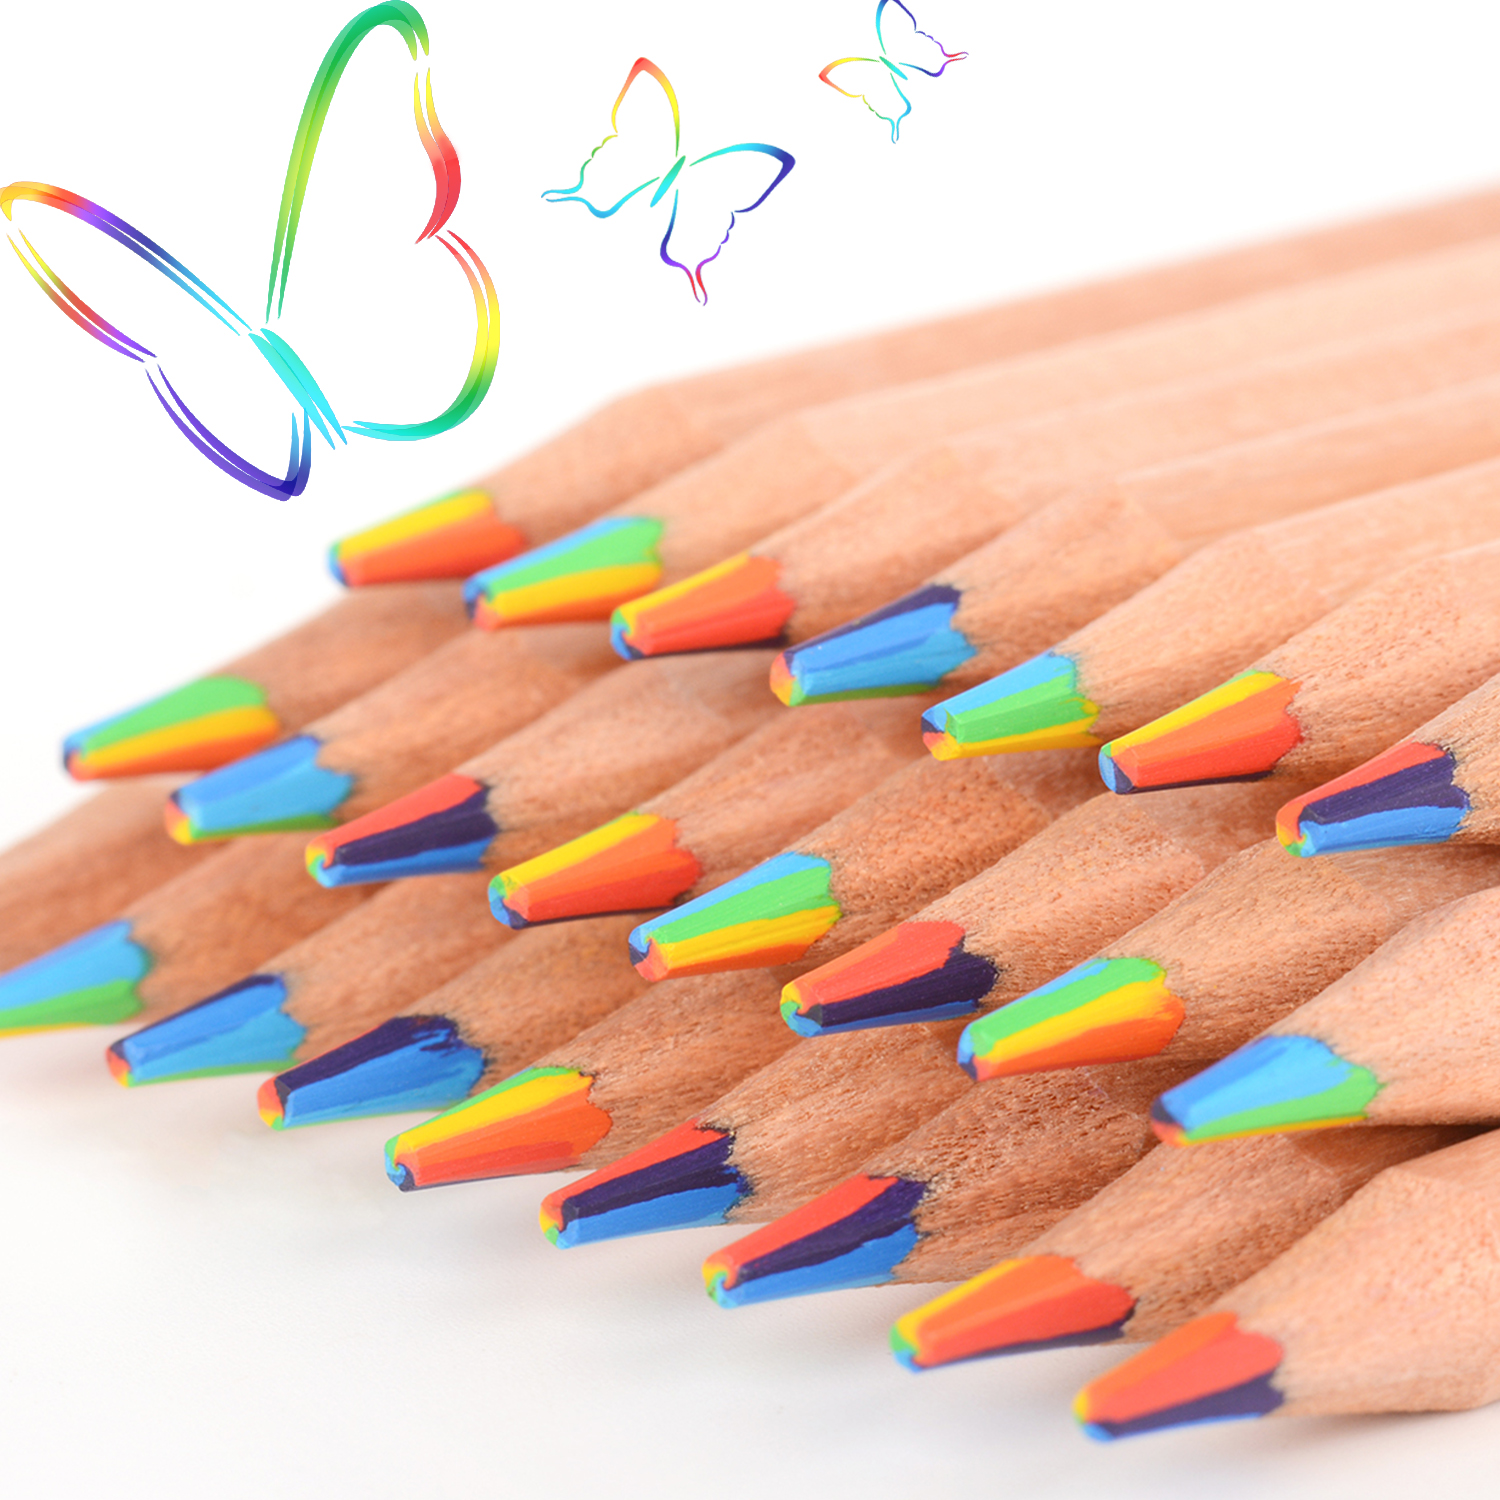 30 Pieces Rainbow Colored Pencils, 7 Color in 1 Pencils for Kids, Assorted Colors for Drawing Coloring Sketching Pencils For Drawing Stationery, Bulk, Pre-sharpened - image 1 of 6